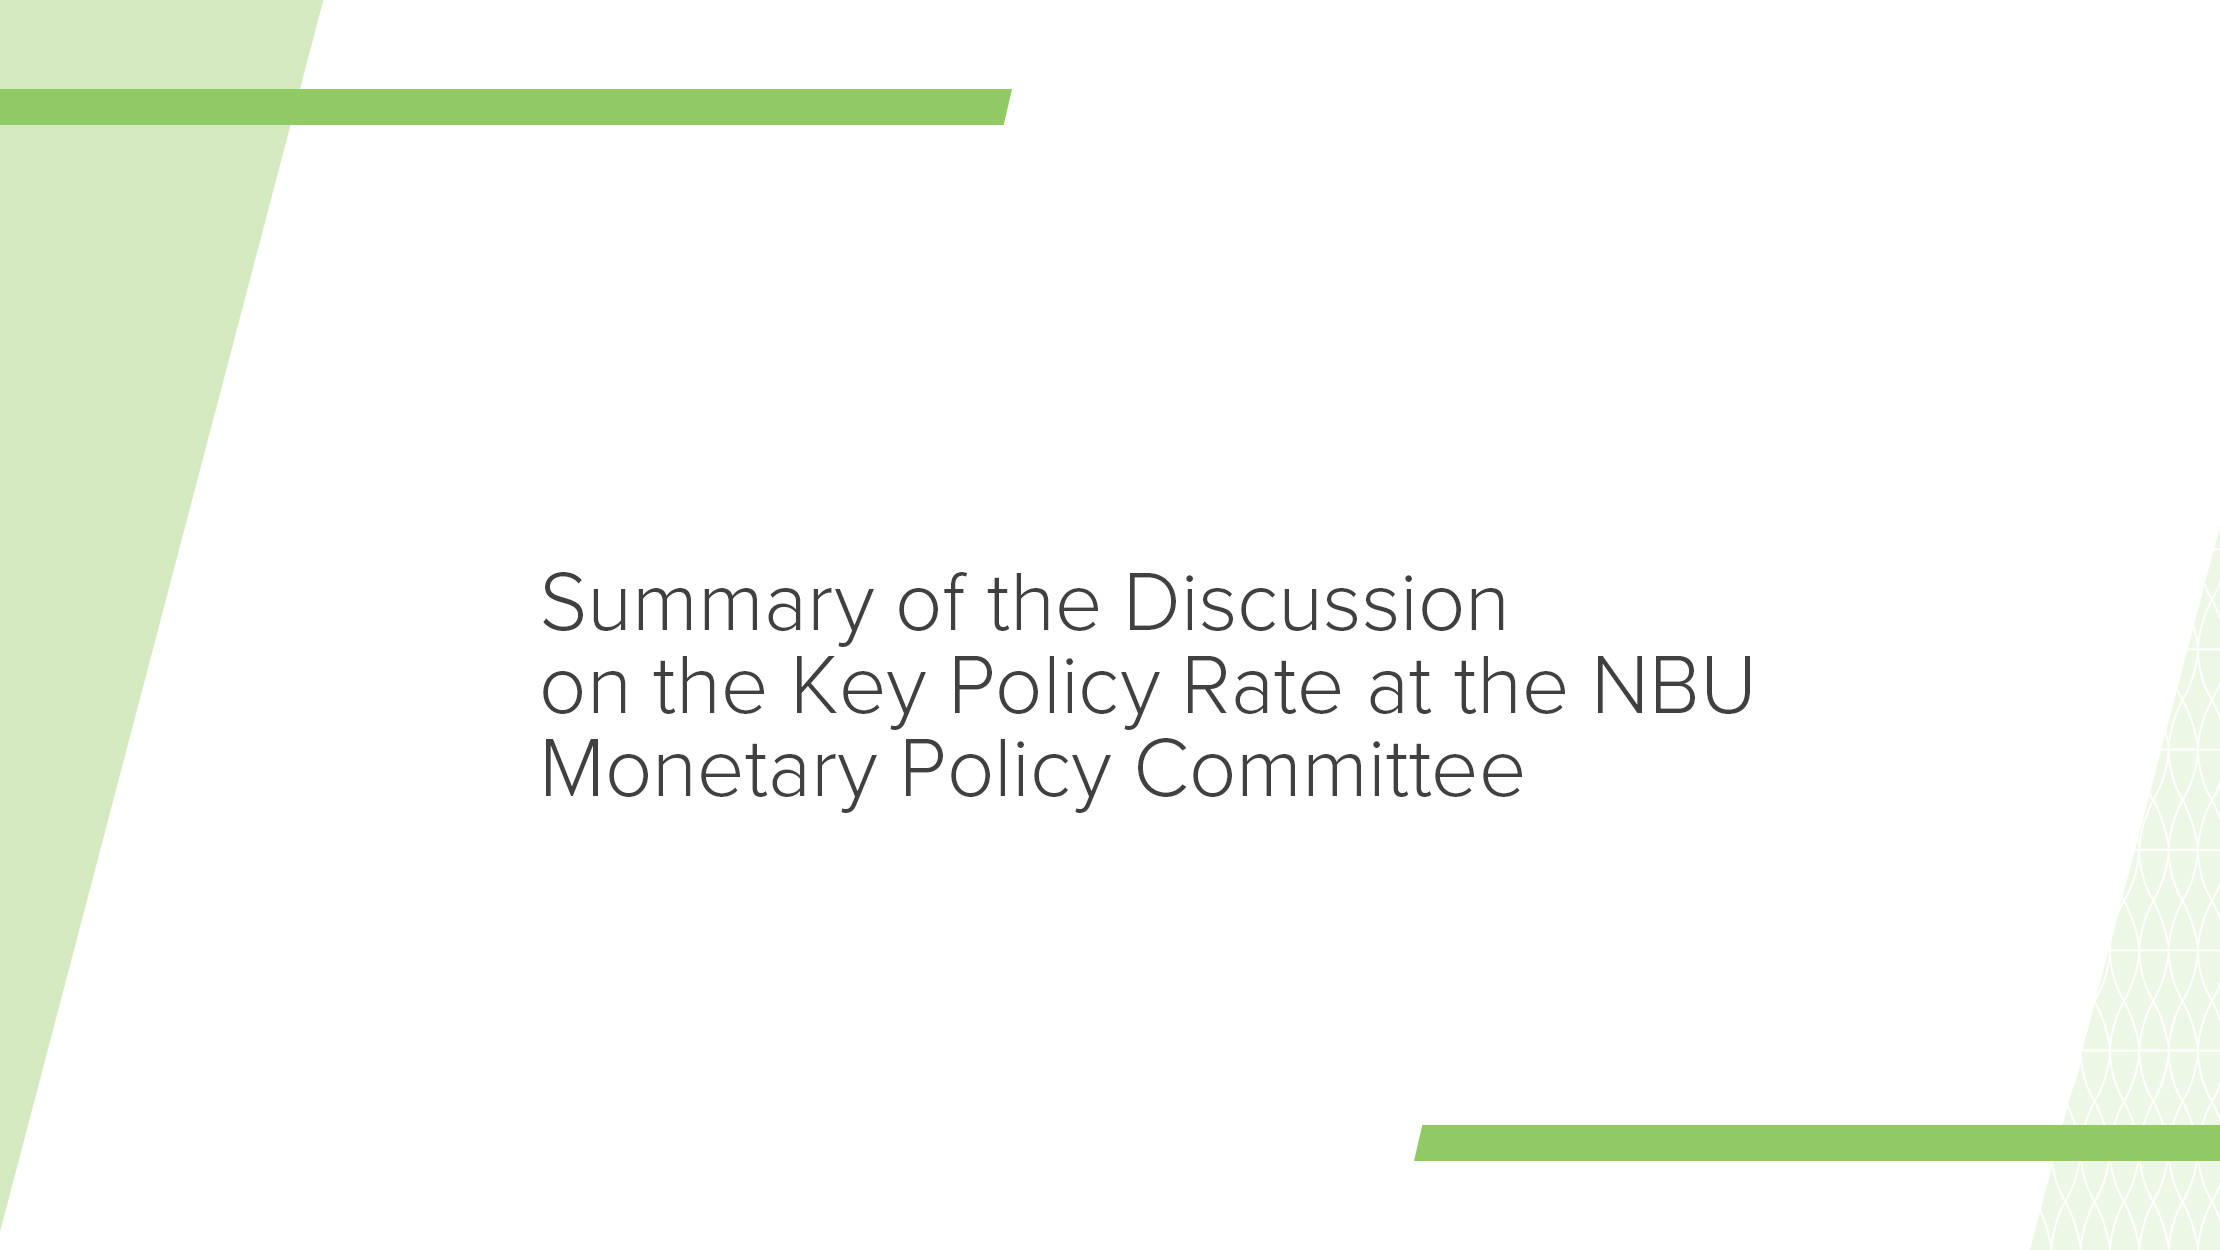 Summary of Key Policy Rate Discussion by NBU Monetary Policy Committee on 7 September 2022